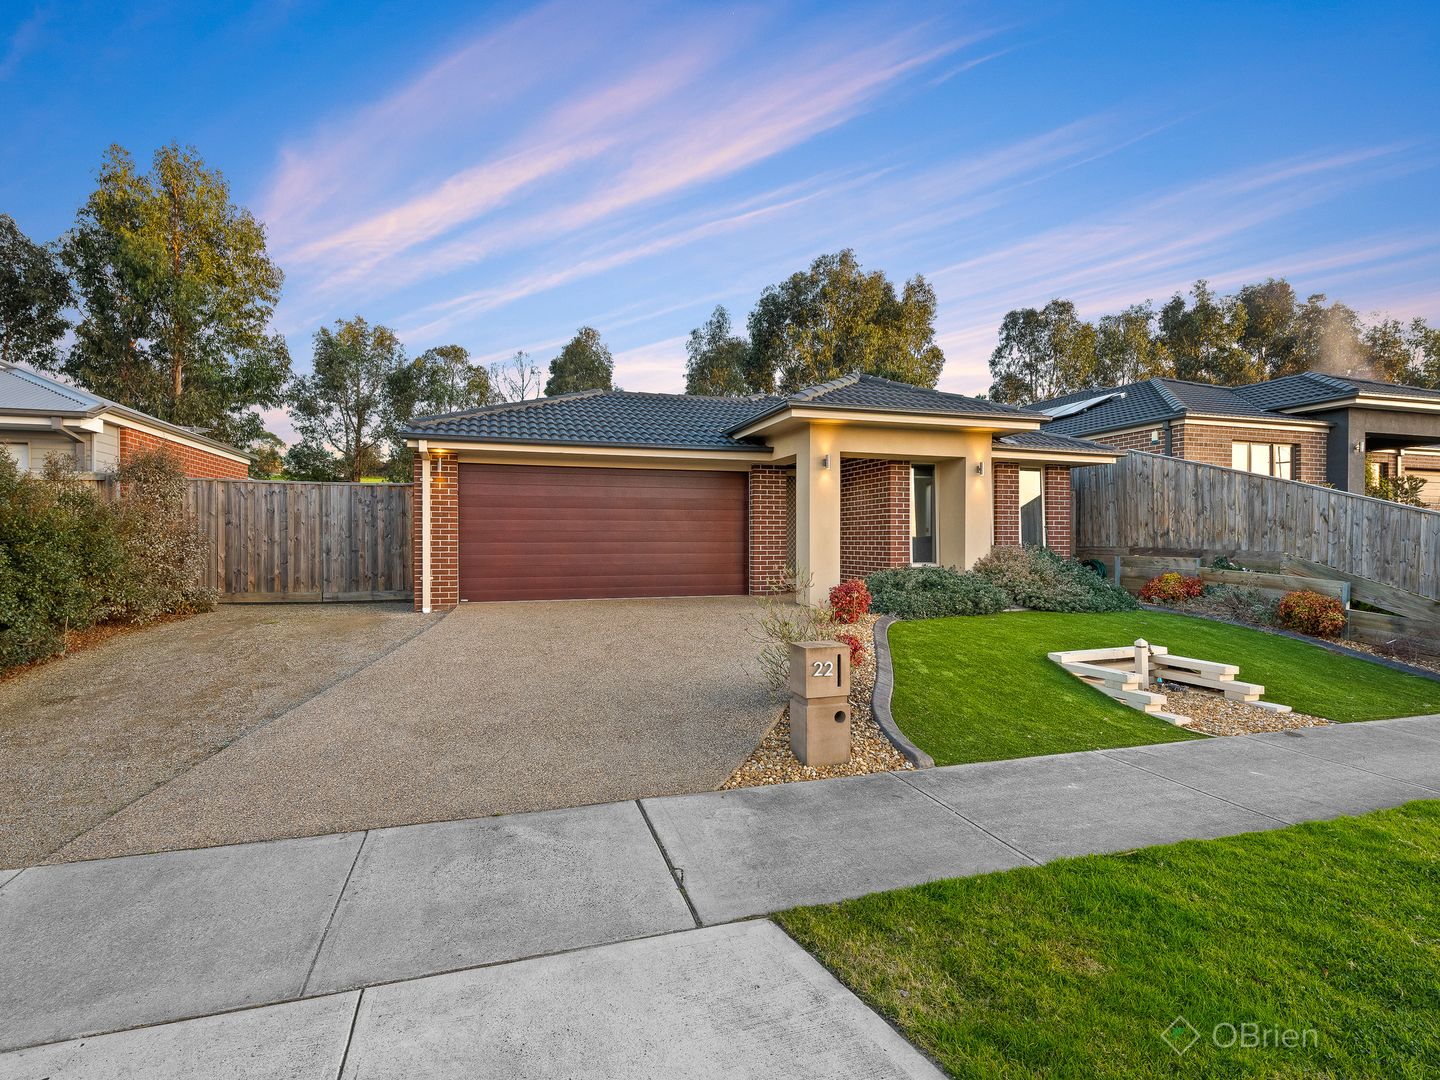 22 Chaucer Way, Drouin VIC 3818